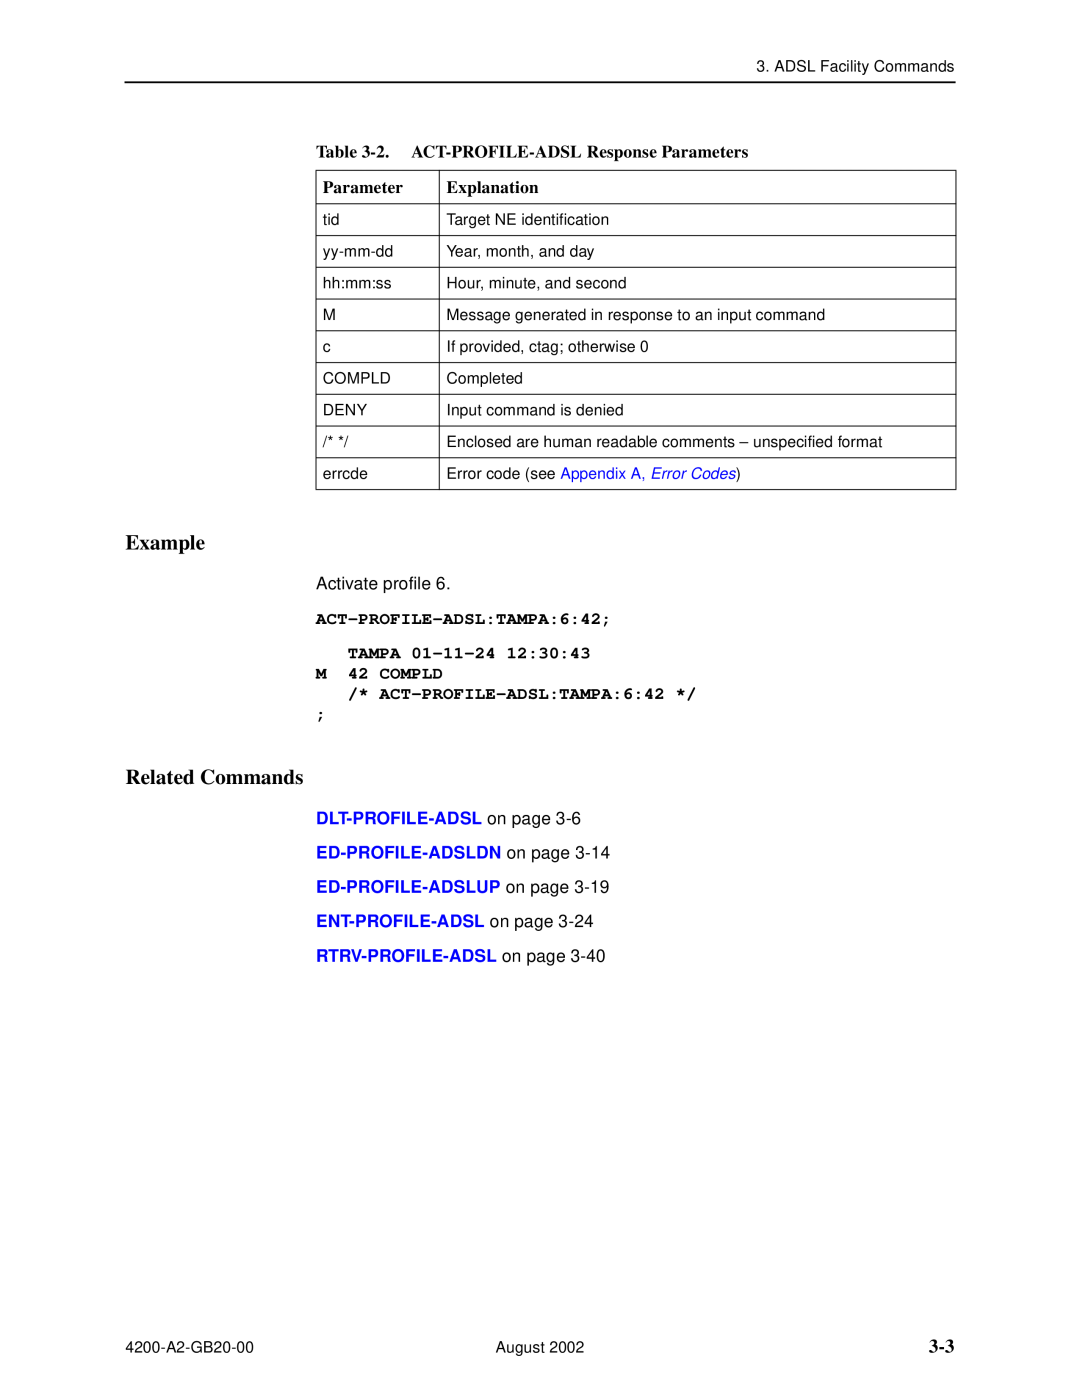 Paradyne 4200 Example, Related Commands, 2. ACT-PROFILE-ADSL Response Parameters, Explanation, ACT-PROFILE-ADSLTAMPA642 